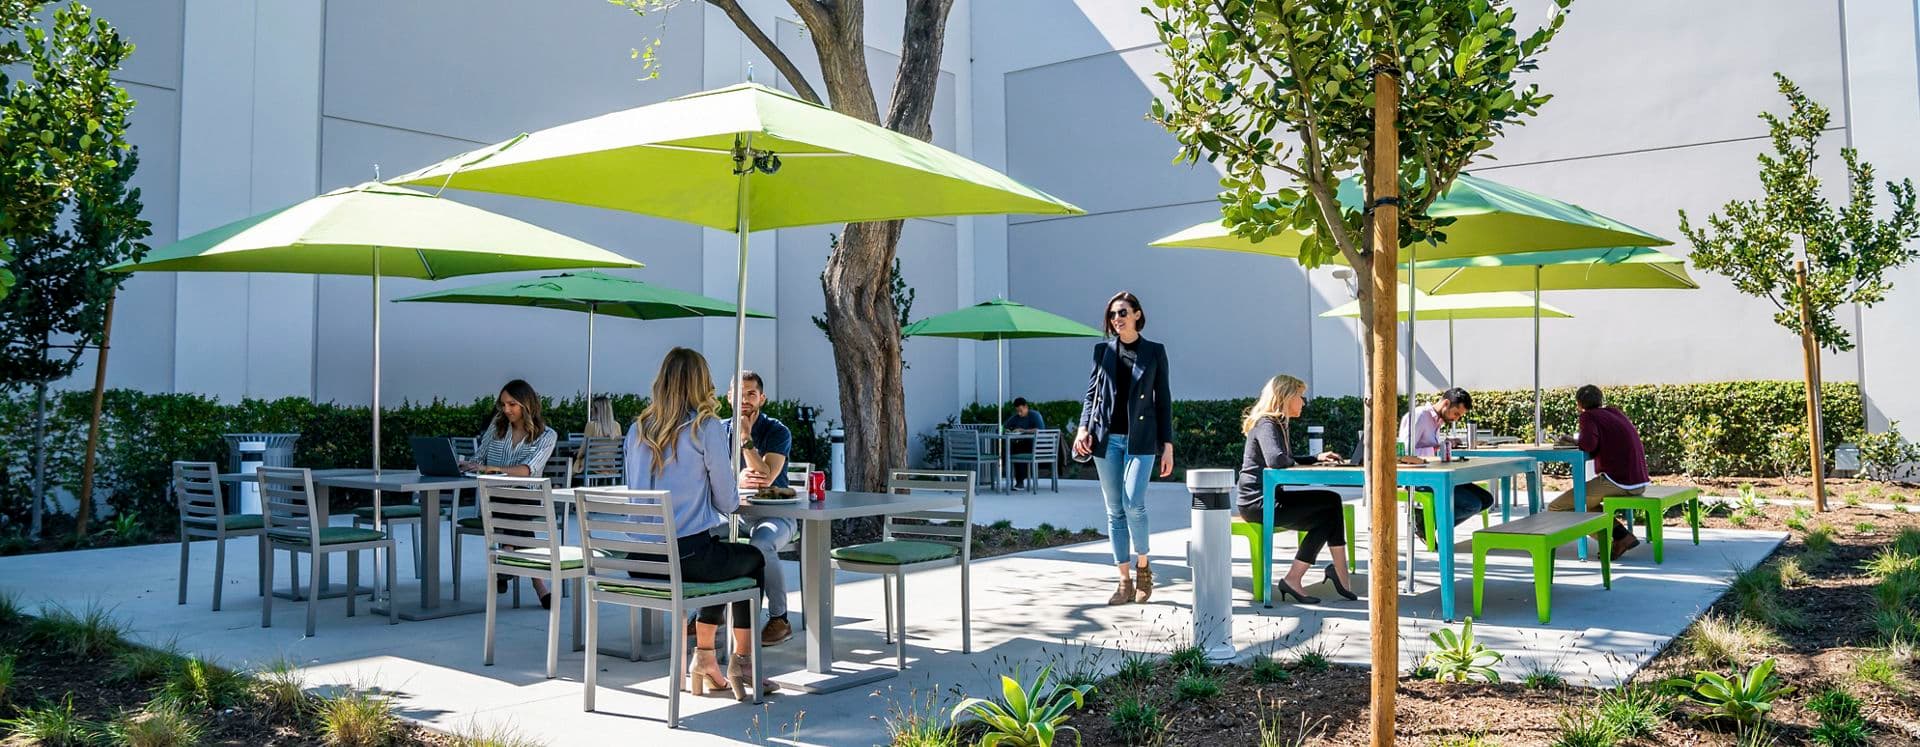 Lifestyle photography of the outdoor reinvestment at Jamboree Business Park - 14350 Myford Road in Irvine, CA